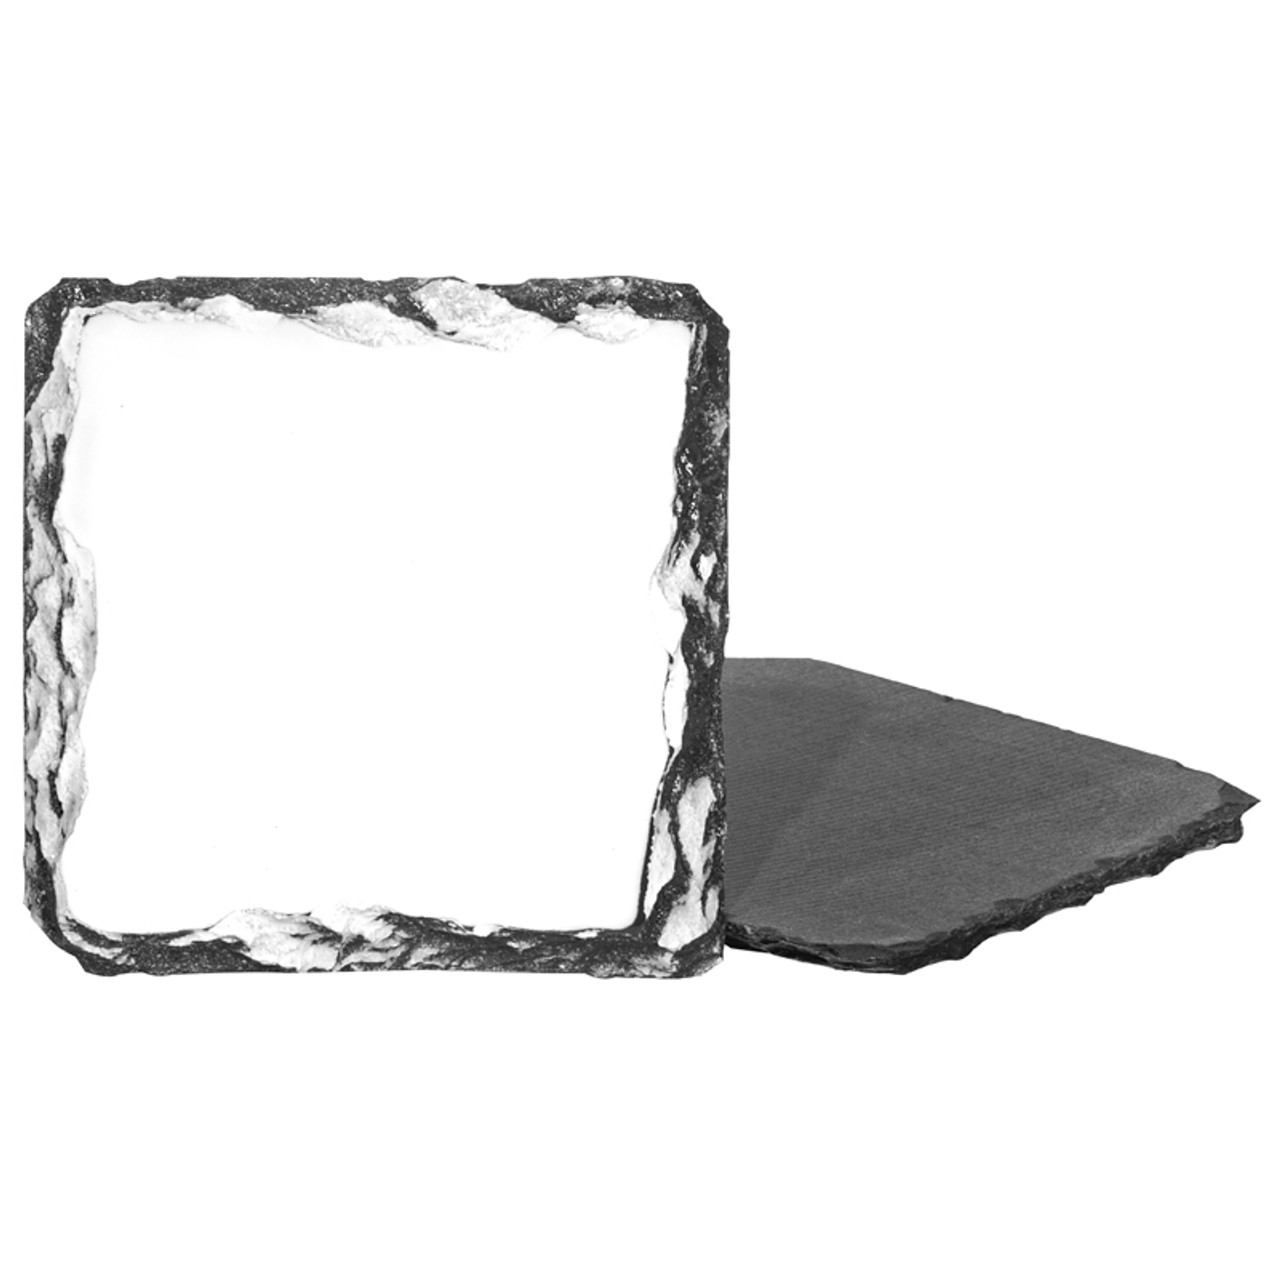 Natural slate photo coaster sublimation blank with white surface